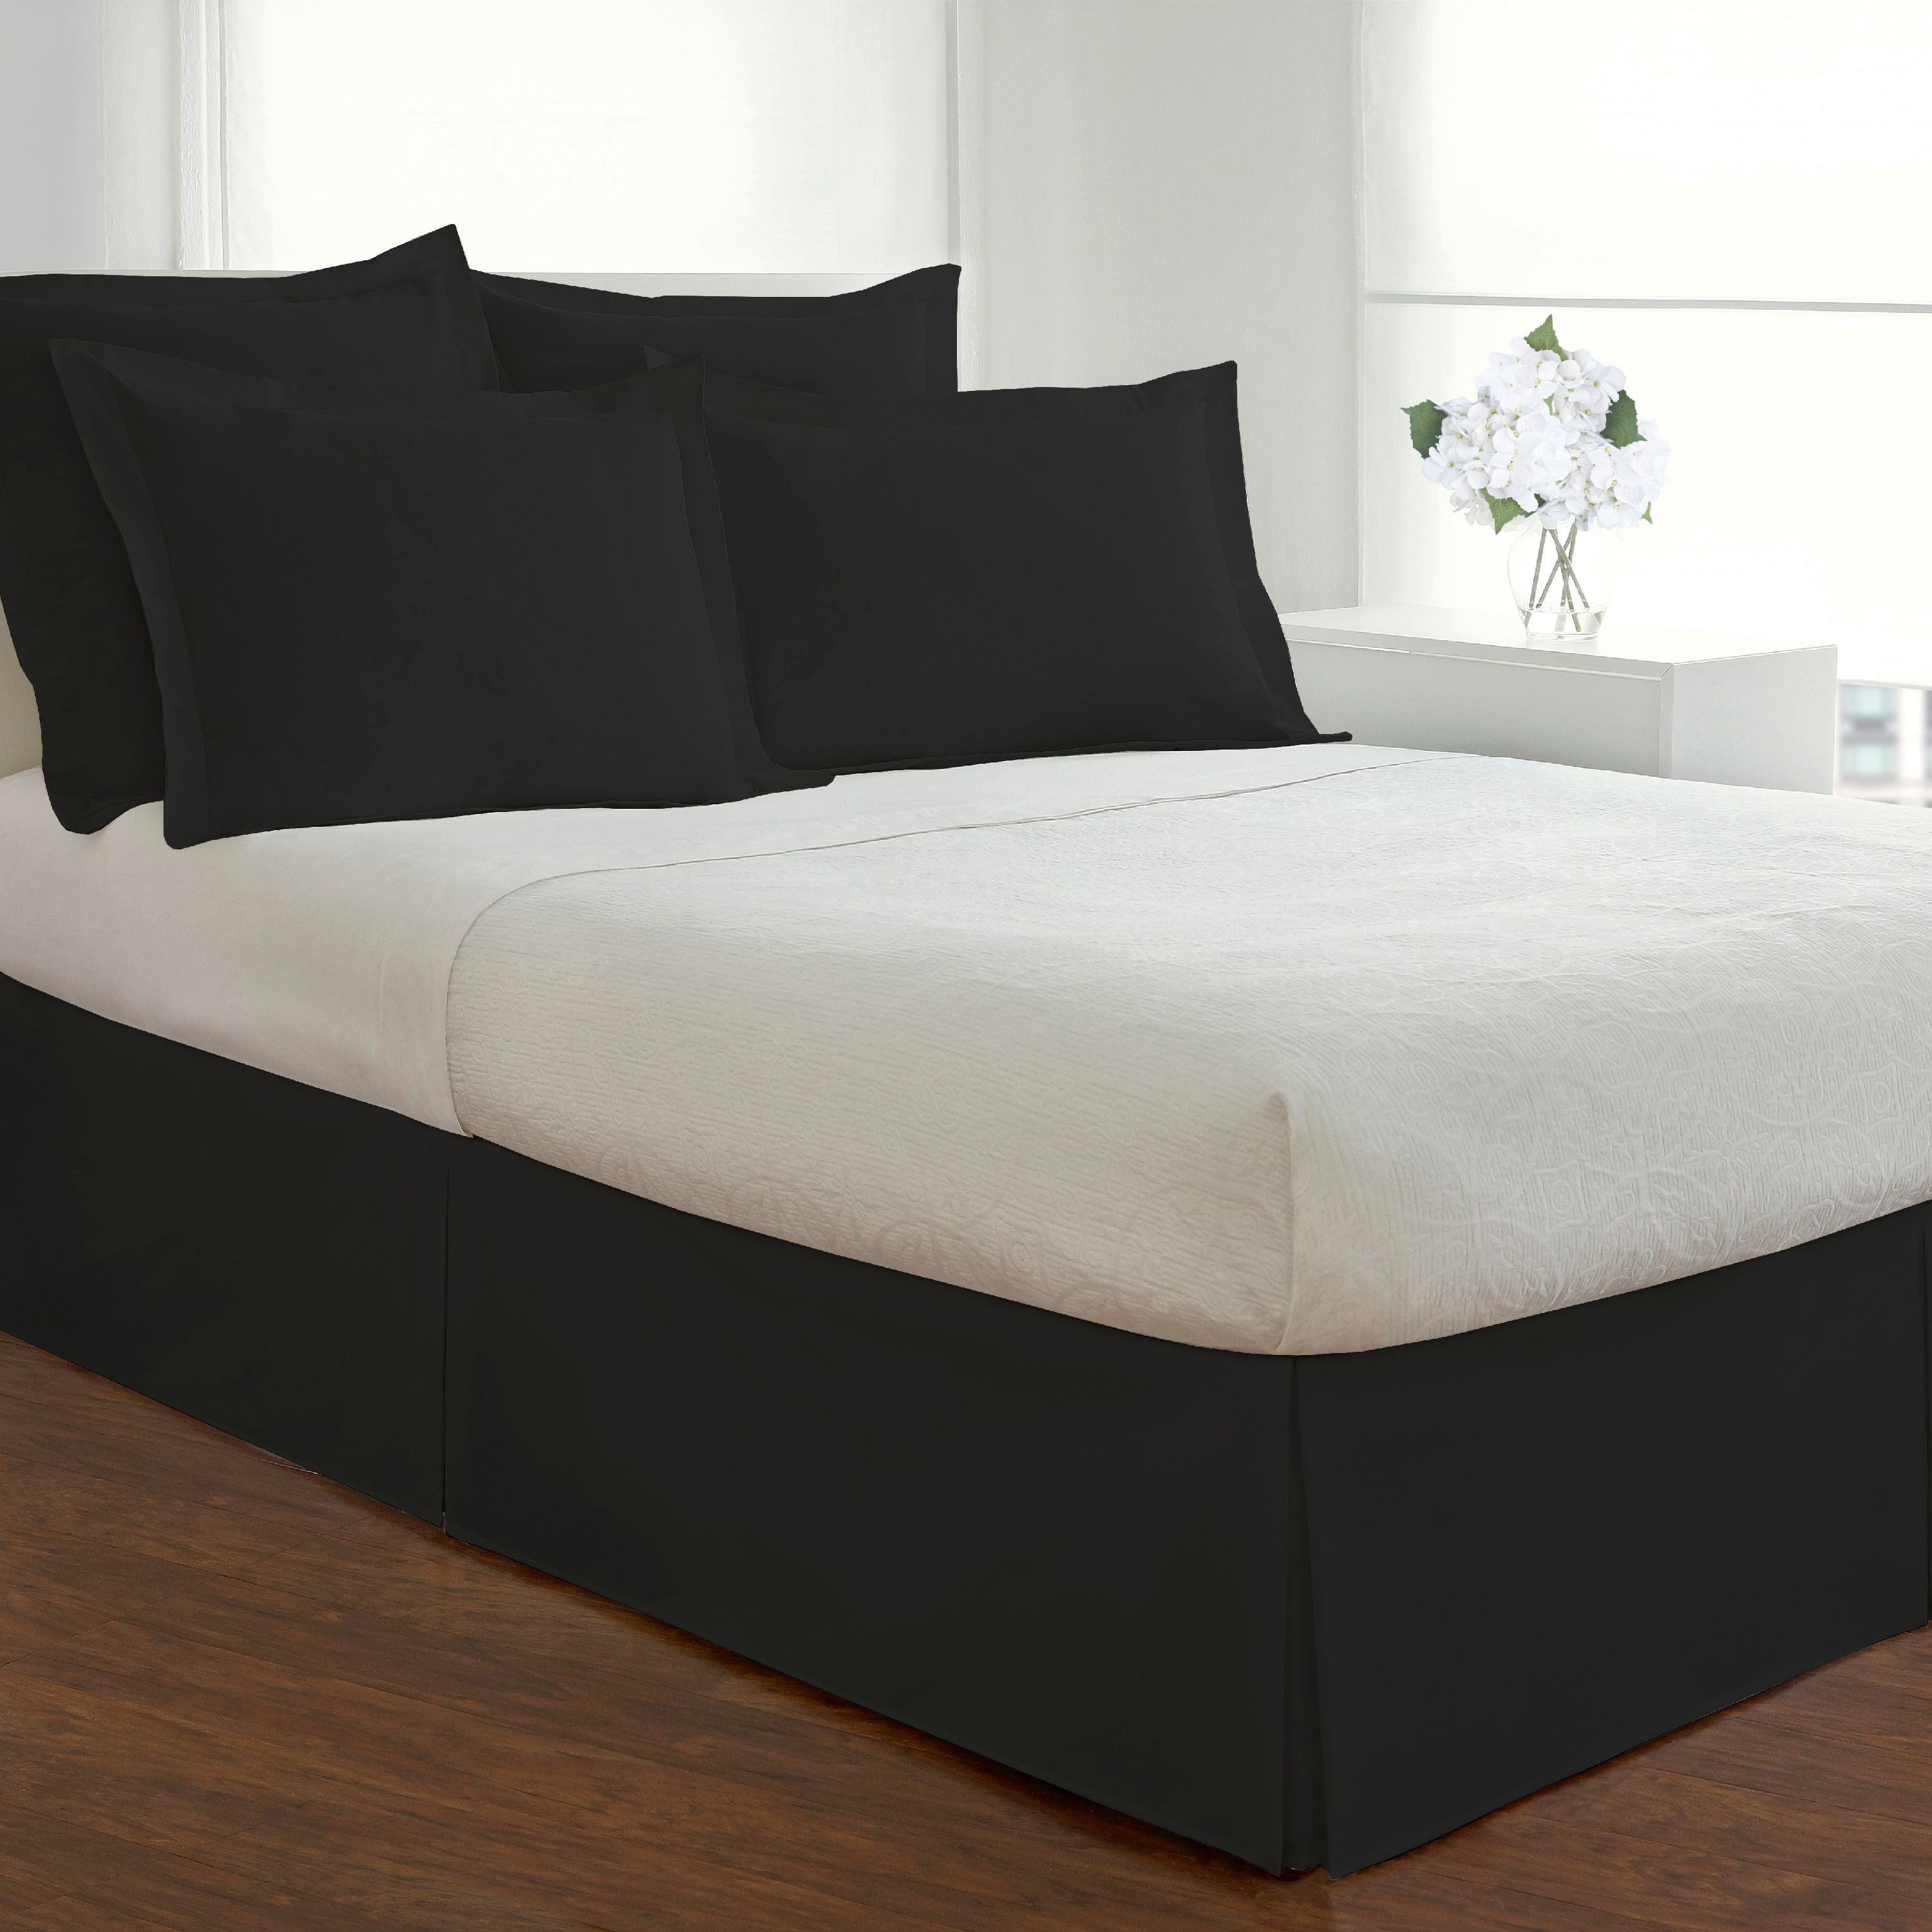 Fresh Ideas Bedding Tailored Bed Skirt, Classic 14” Drop Length, Pleated Styling, Twin, Black - image 2 of 6